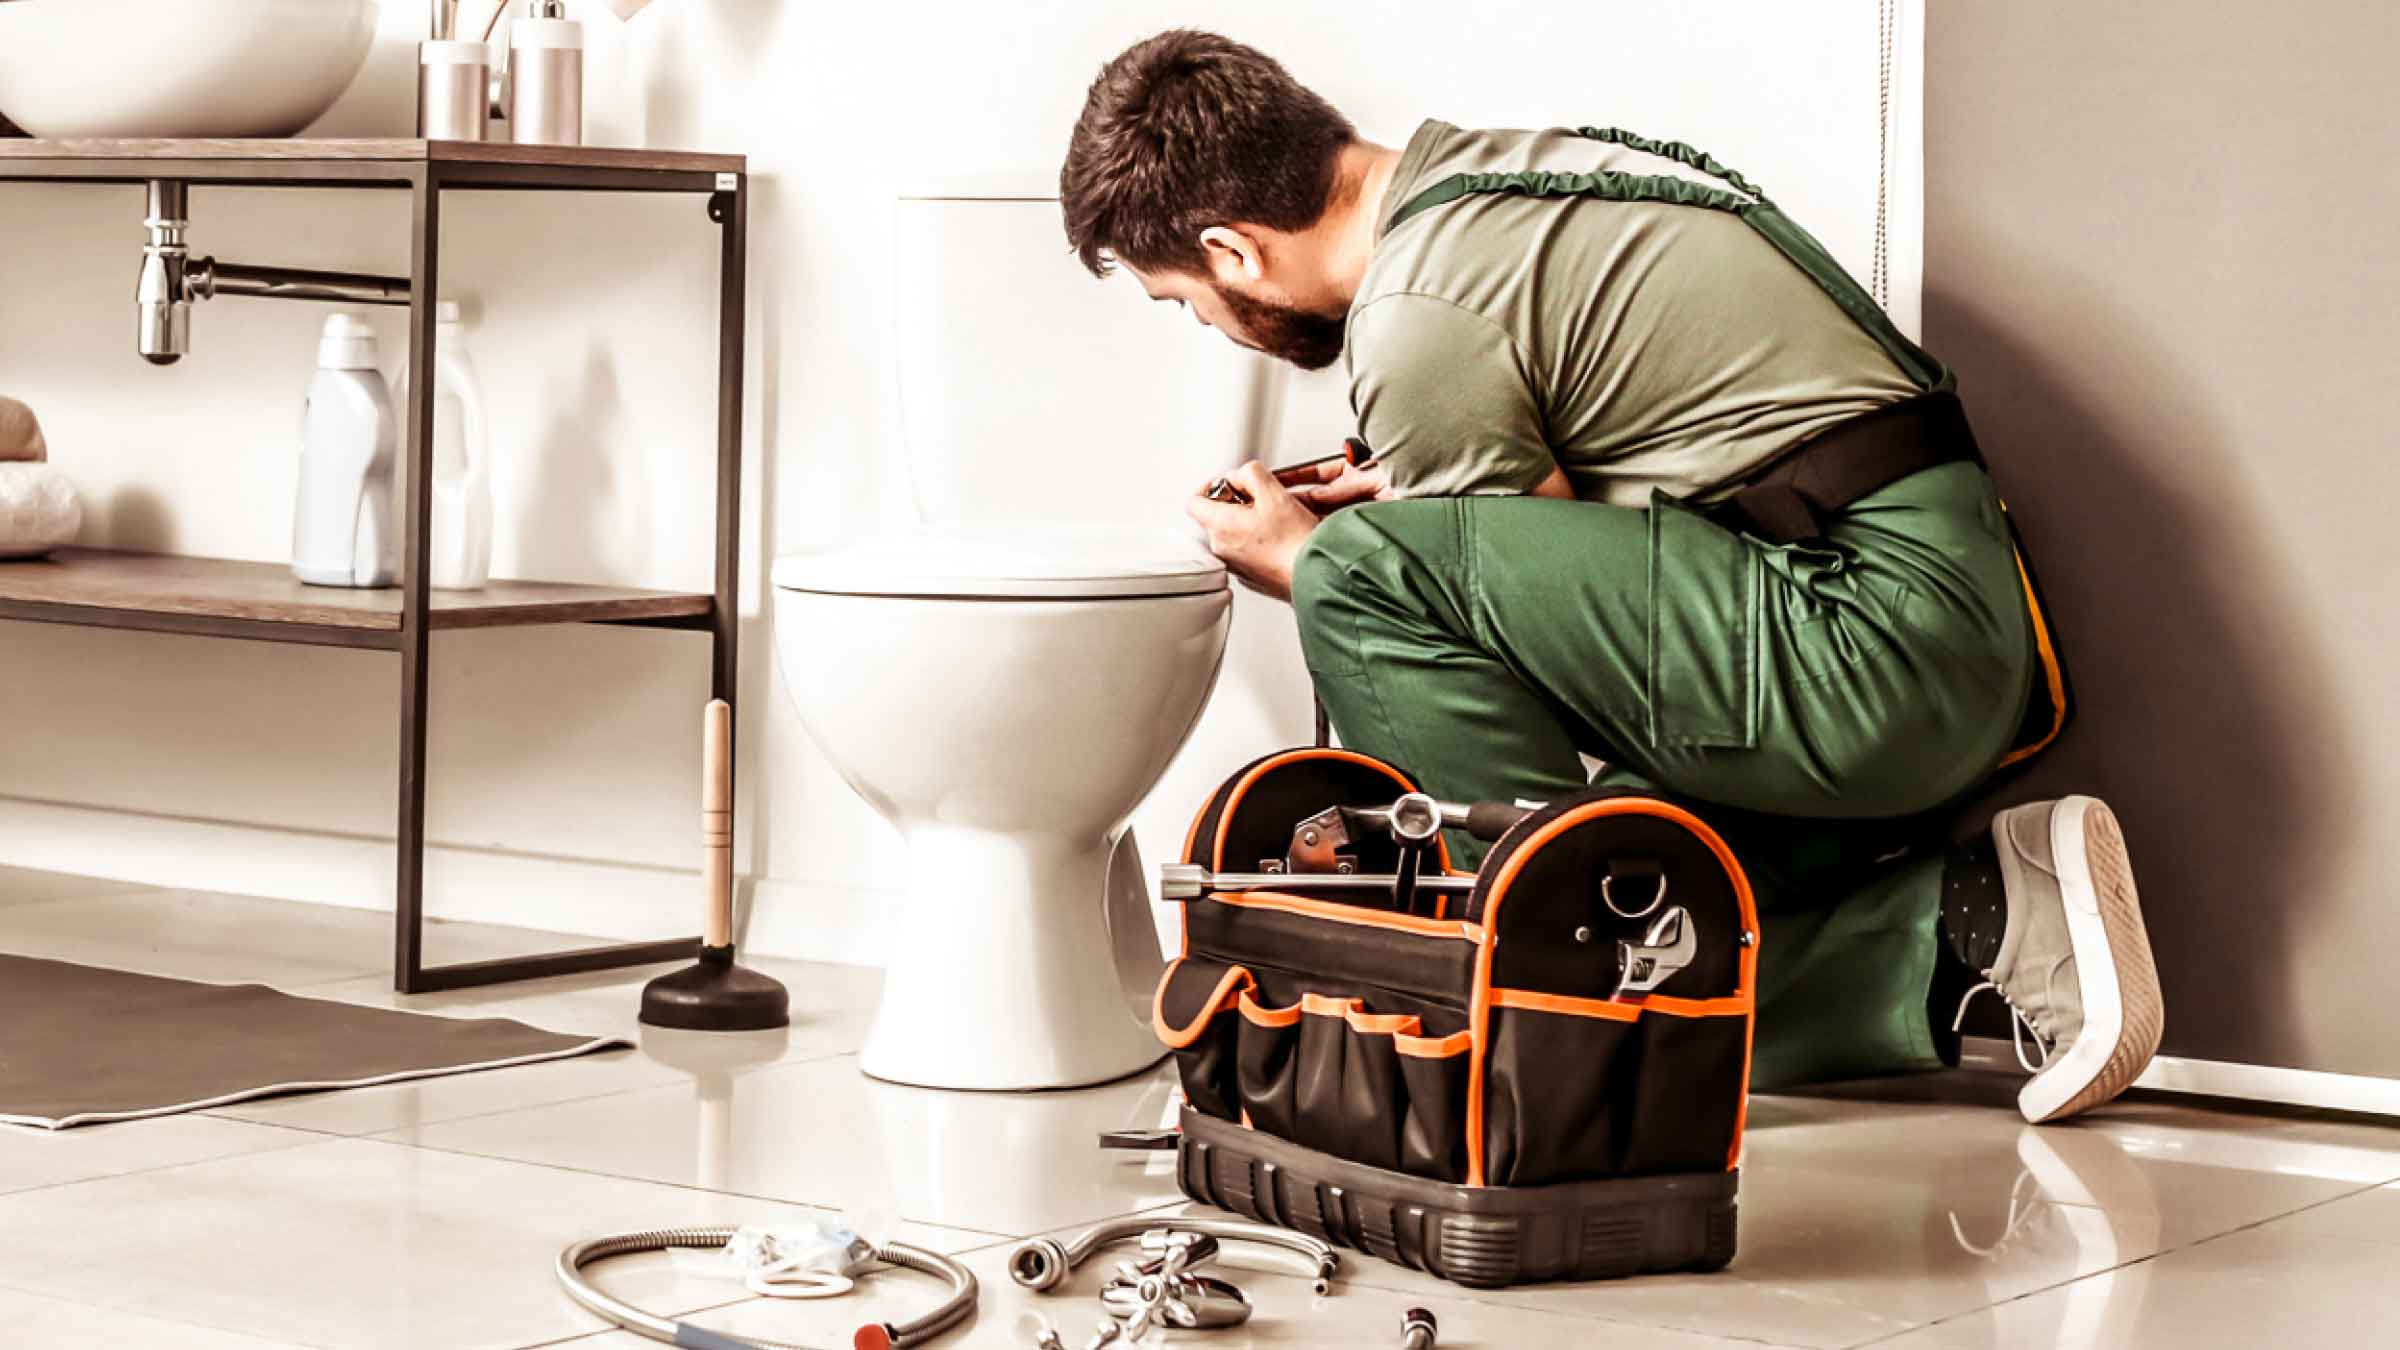 Plumber in green overalls, kneels beside a toilet. His tool bag, and plumbing parts are laid out beside him.